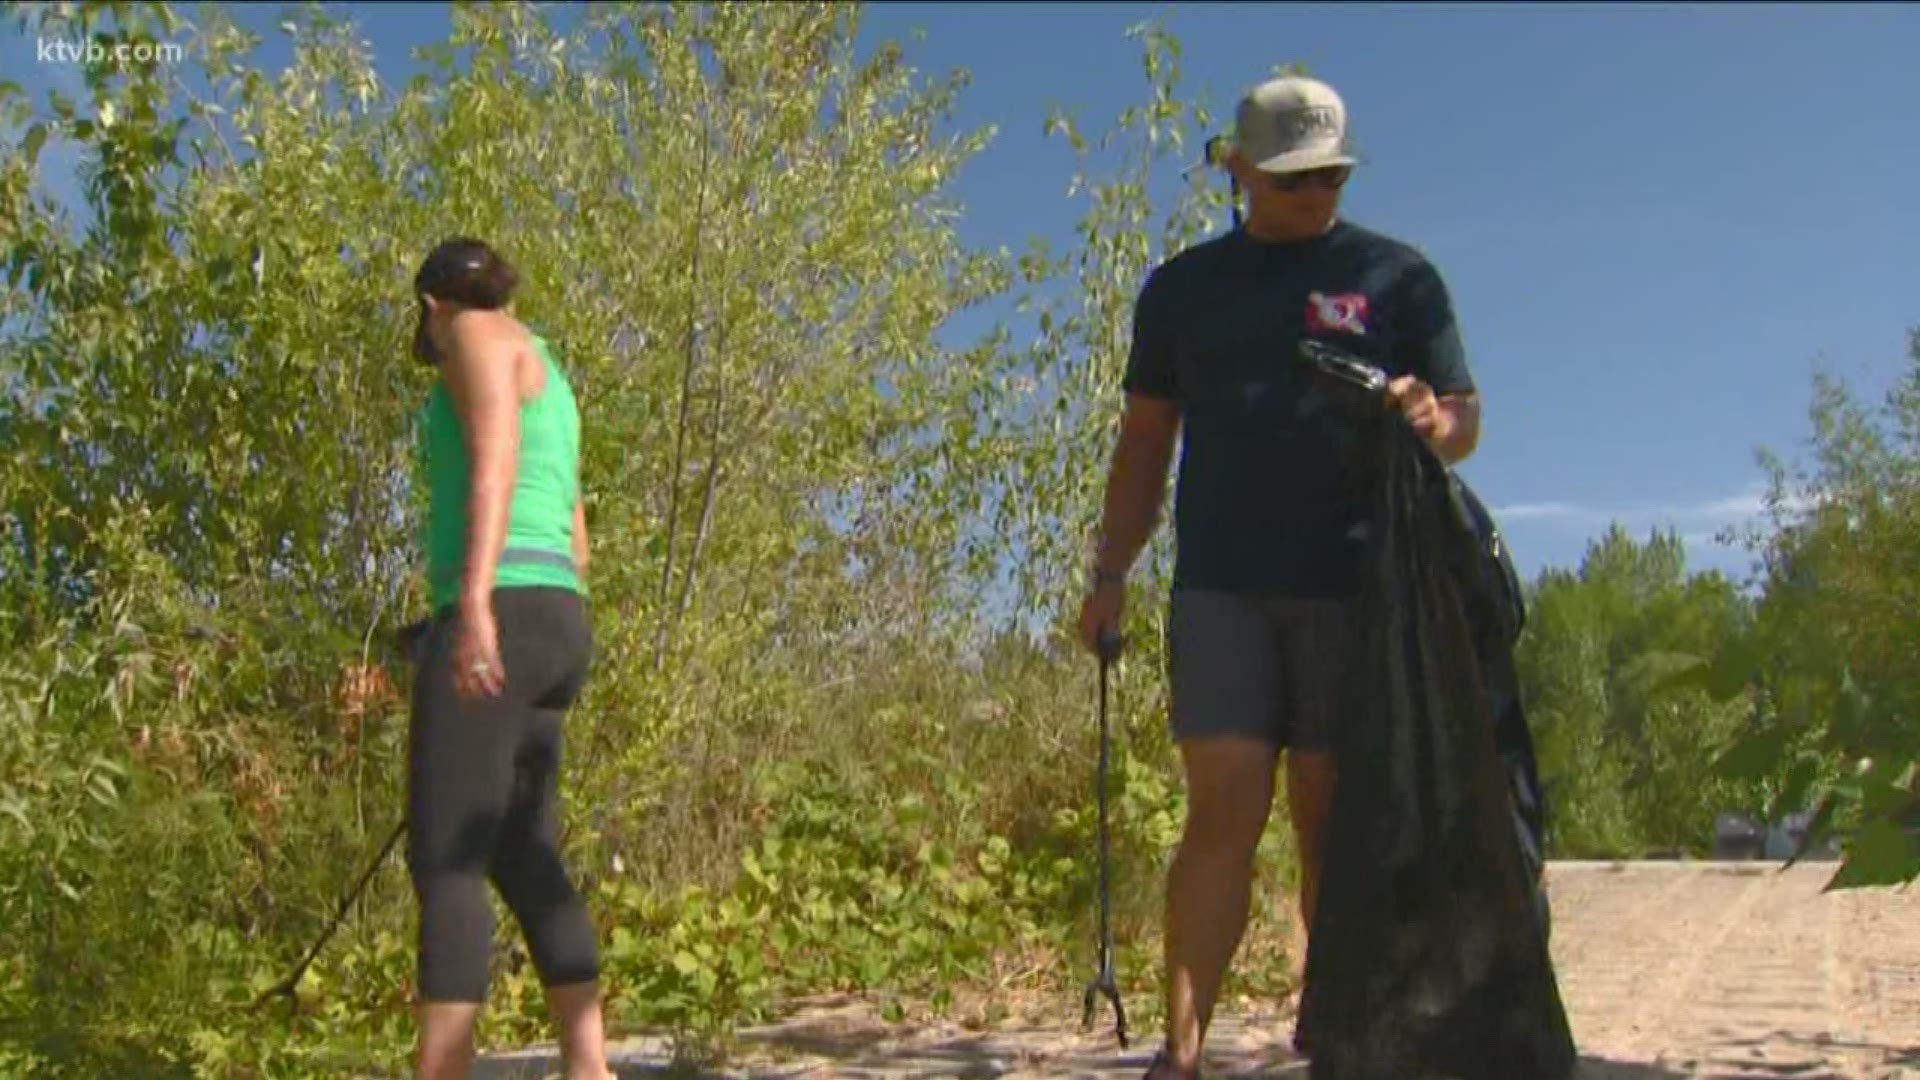 Volunteer picked up trash in parks and along the Boise River Saturday.